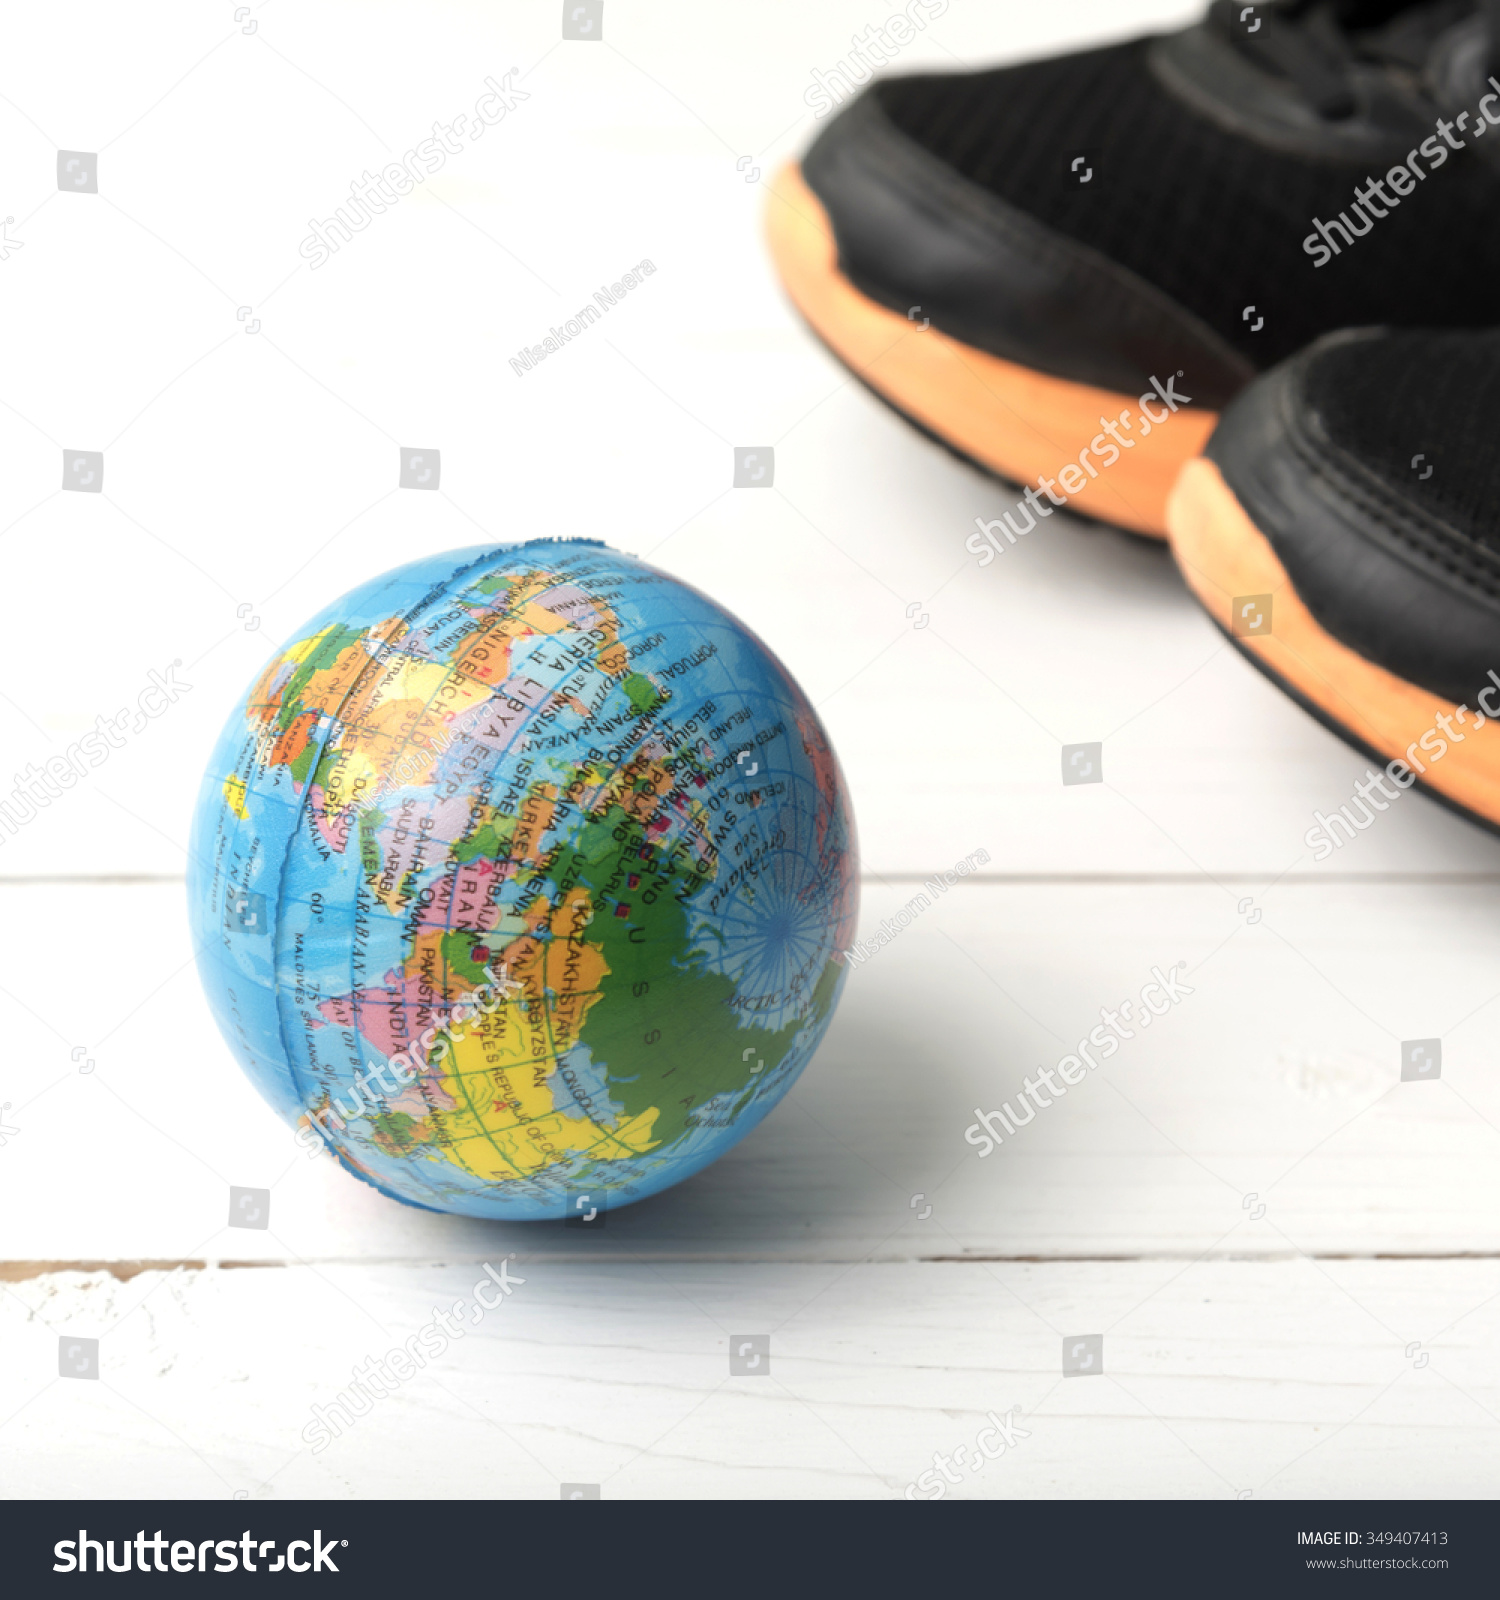 the bay planet earth shoes